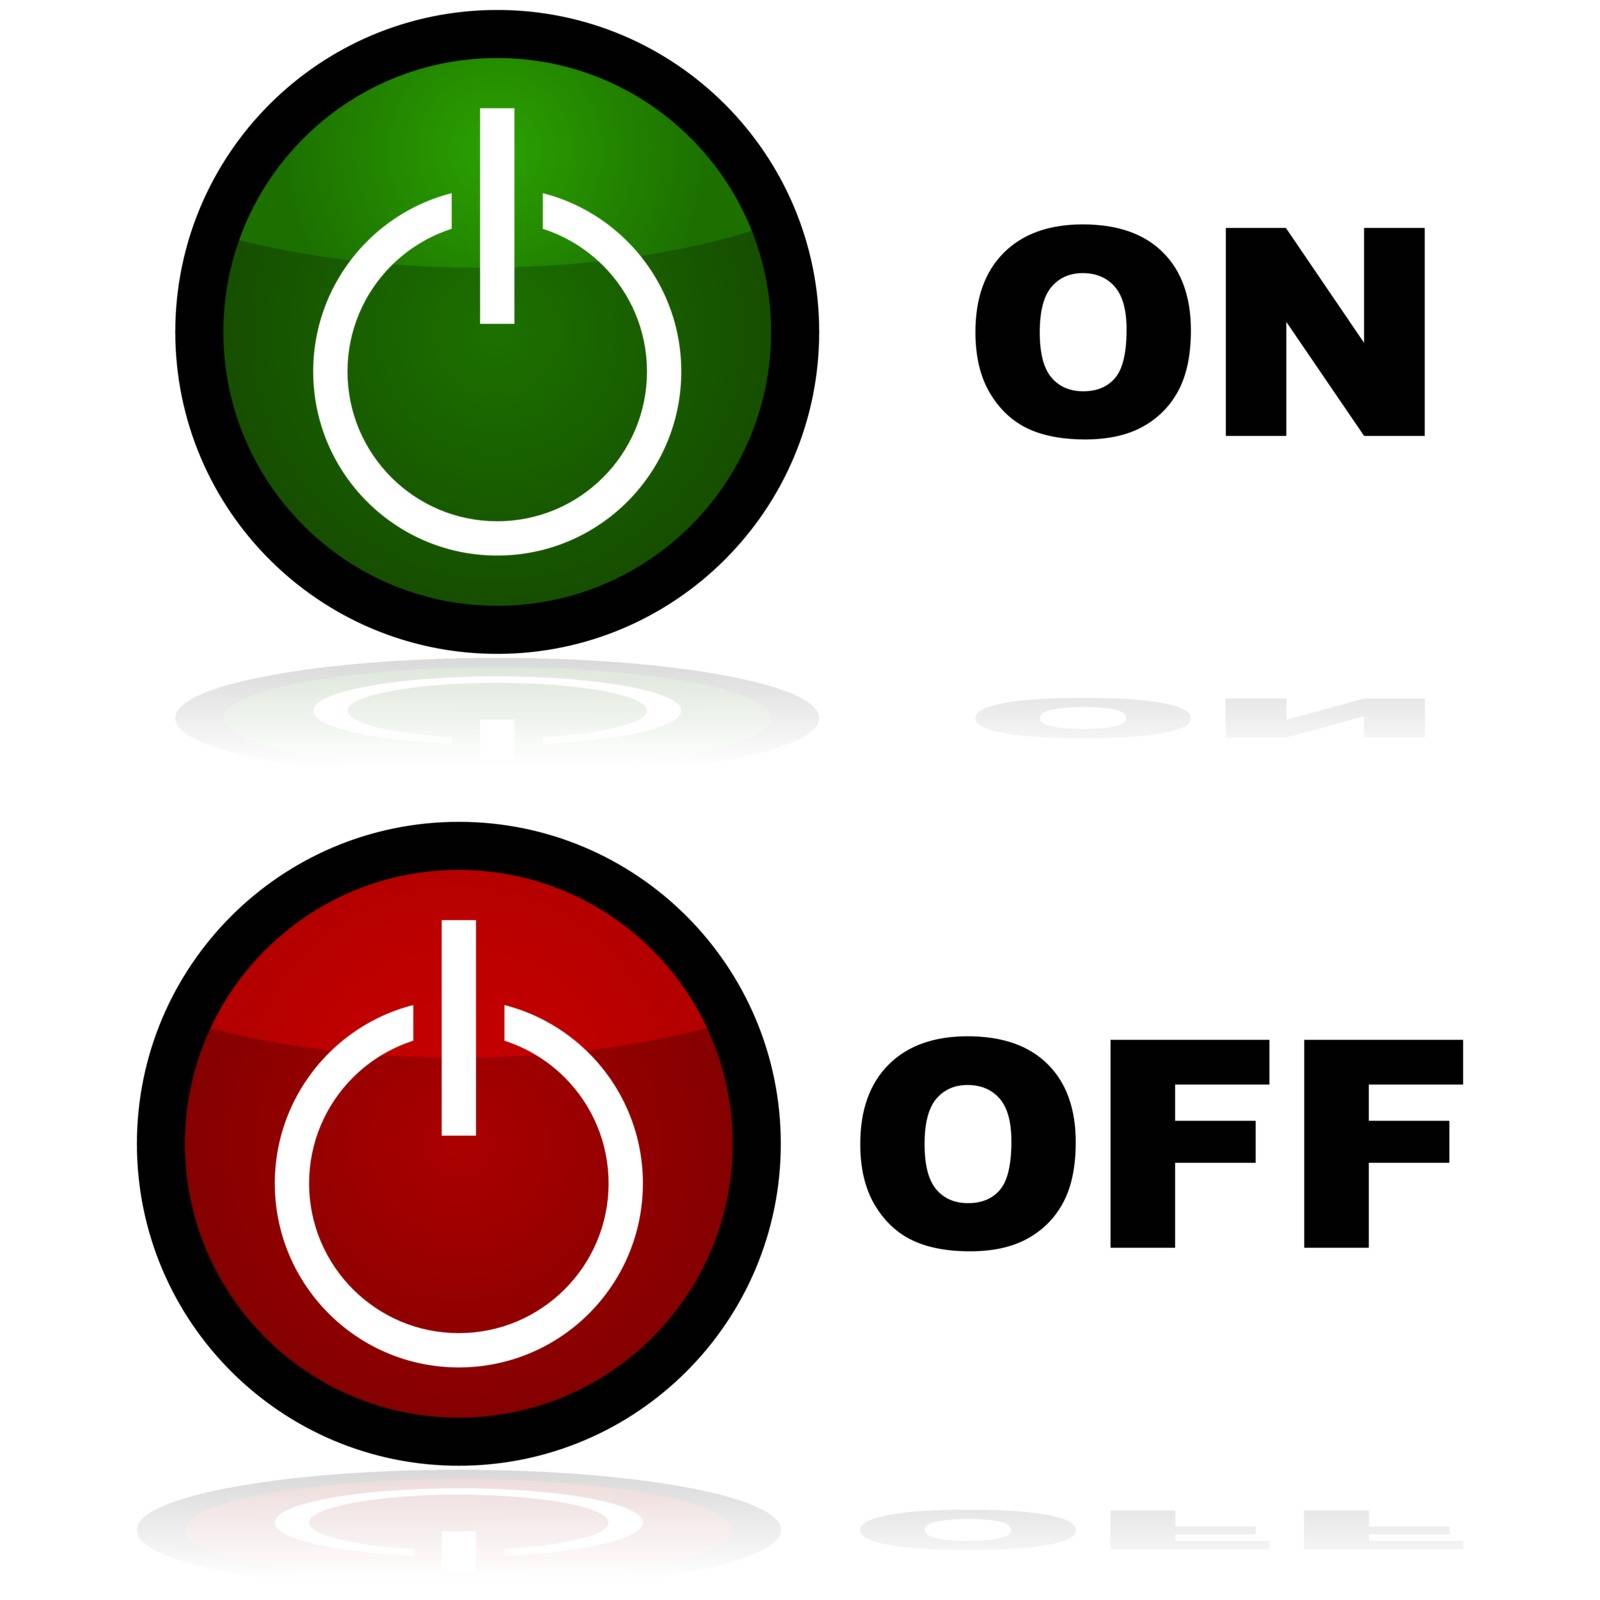 Glossy illustration showing on and off buttons in green and red, respectively